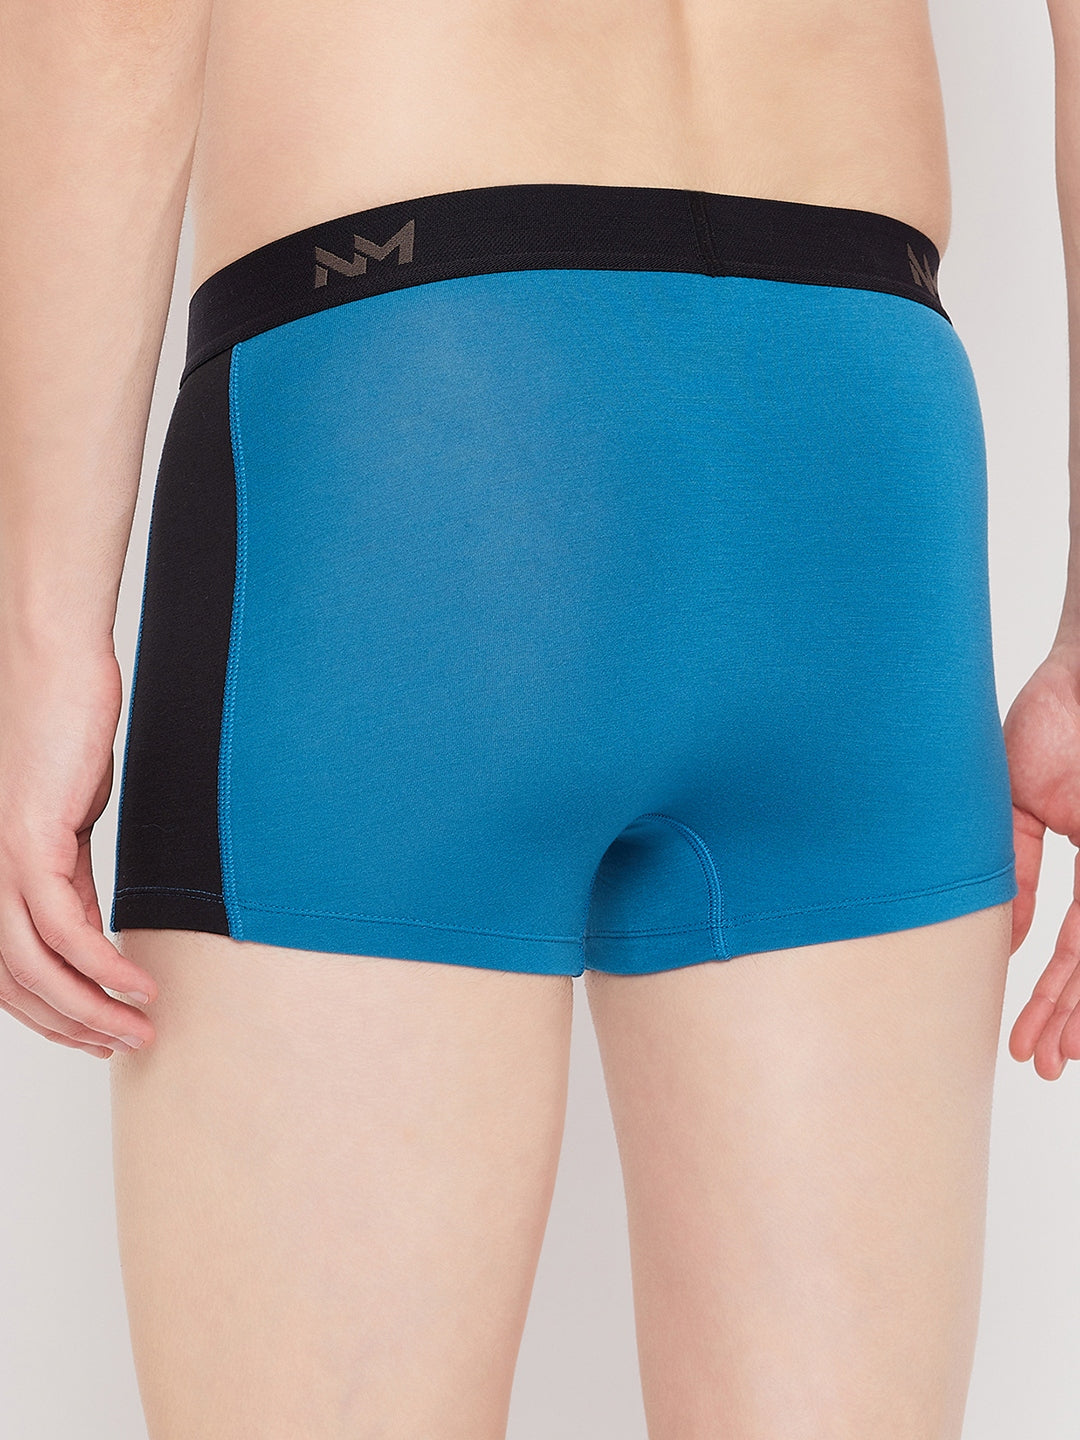 Neva Modal Solid Ultra Short Trunk Underwear for Men- Maroon, Silver Grey, Blue Collection (Pack of 3)